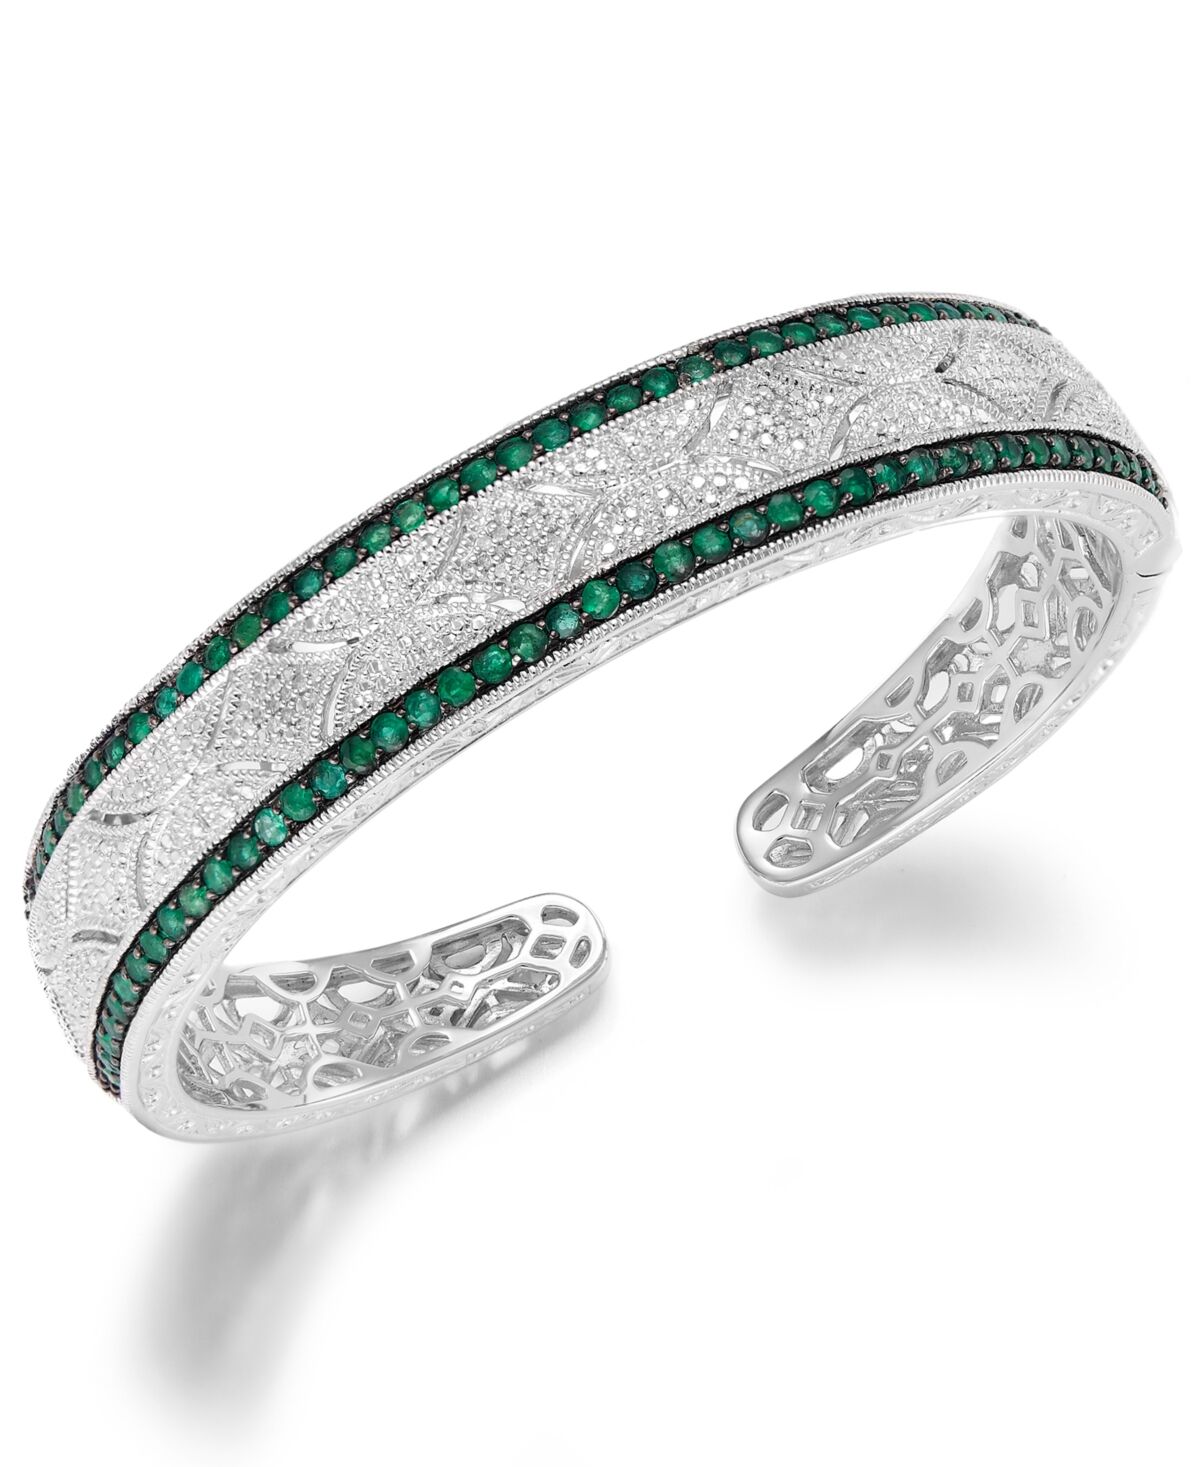 Macy's Sapphire (2-3/8 ct. t.w.) and Diamond (1/10 ct. t.w.) Antique Cuff Bracelet in Sterling Silver (Also available in Emerald and Ruby) - Emerald